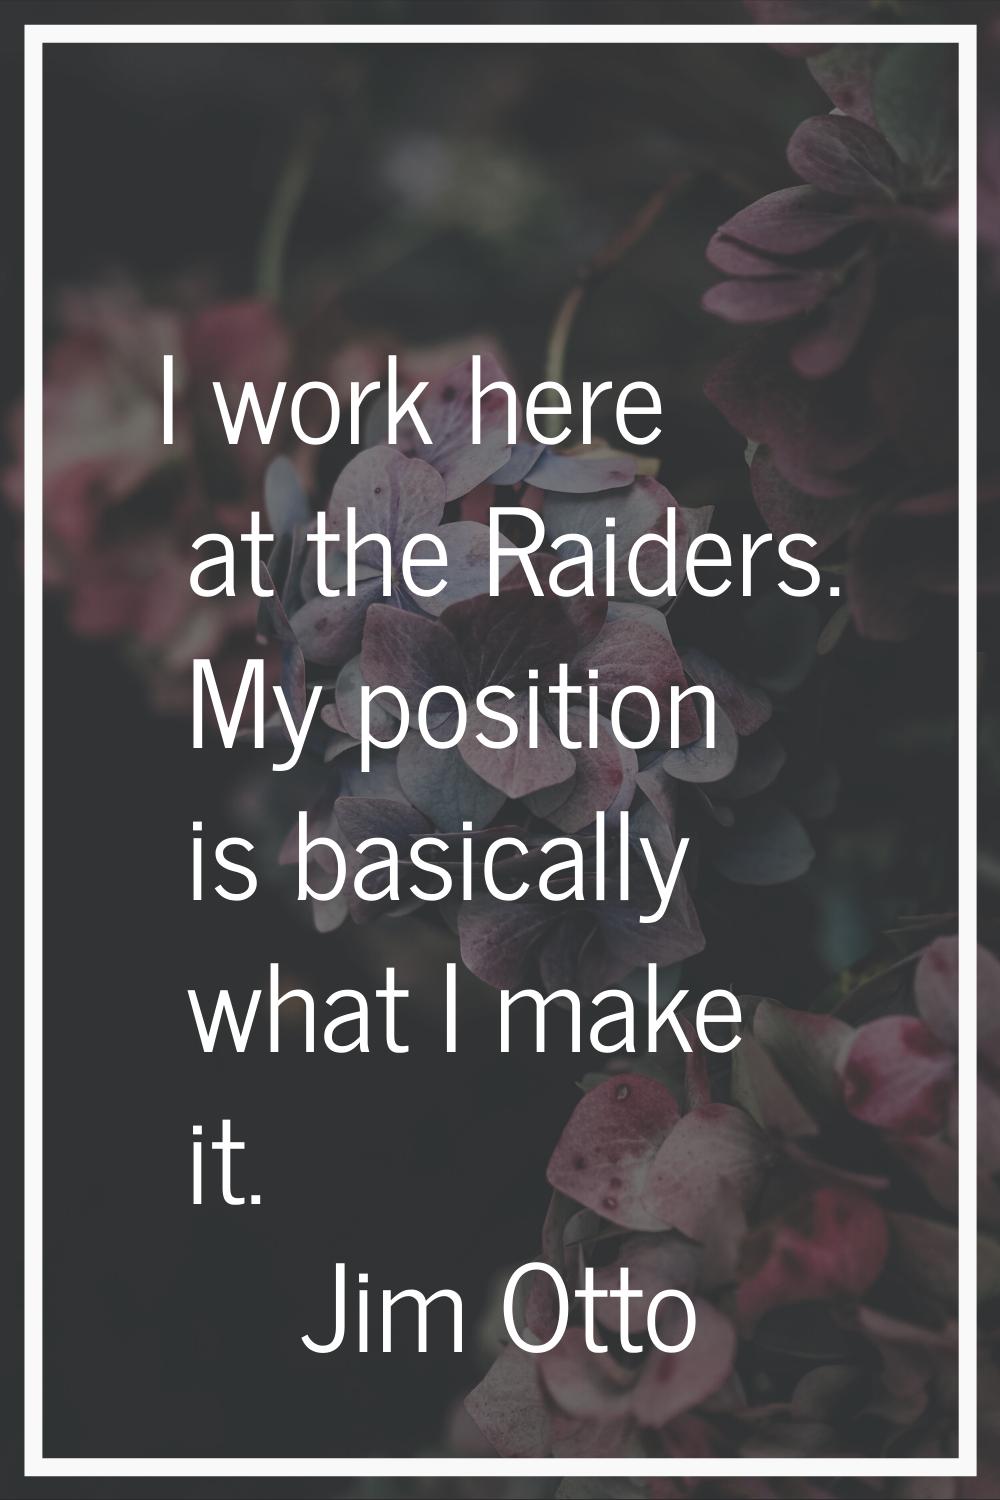 I work here at the Raiders. My position is basically what I make it.